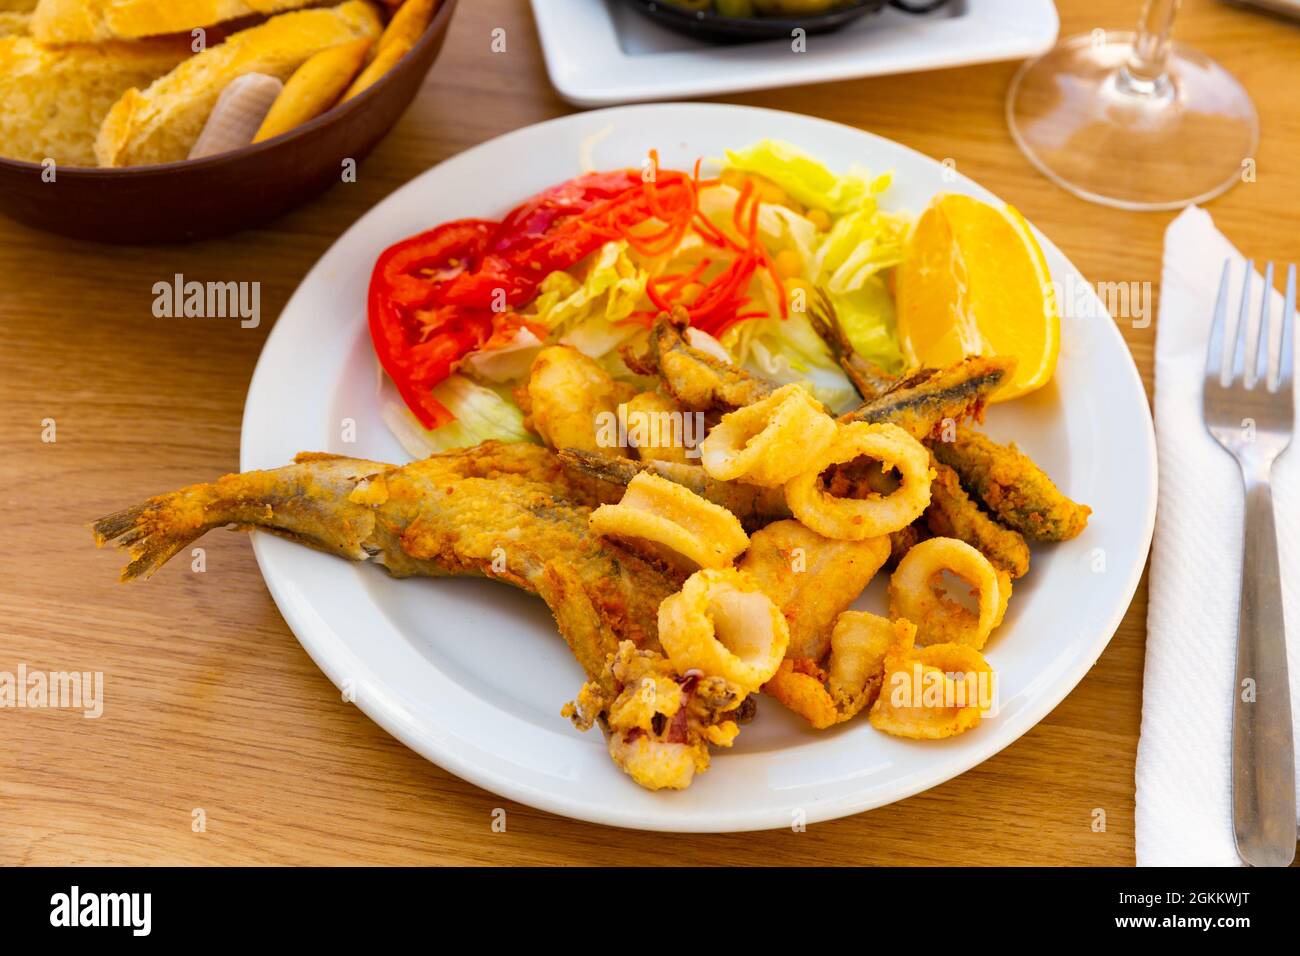 Fried seafood delicacies with fresh vegetables and lemon Stock Photo